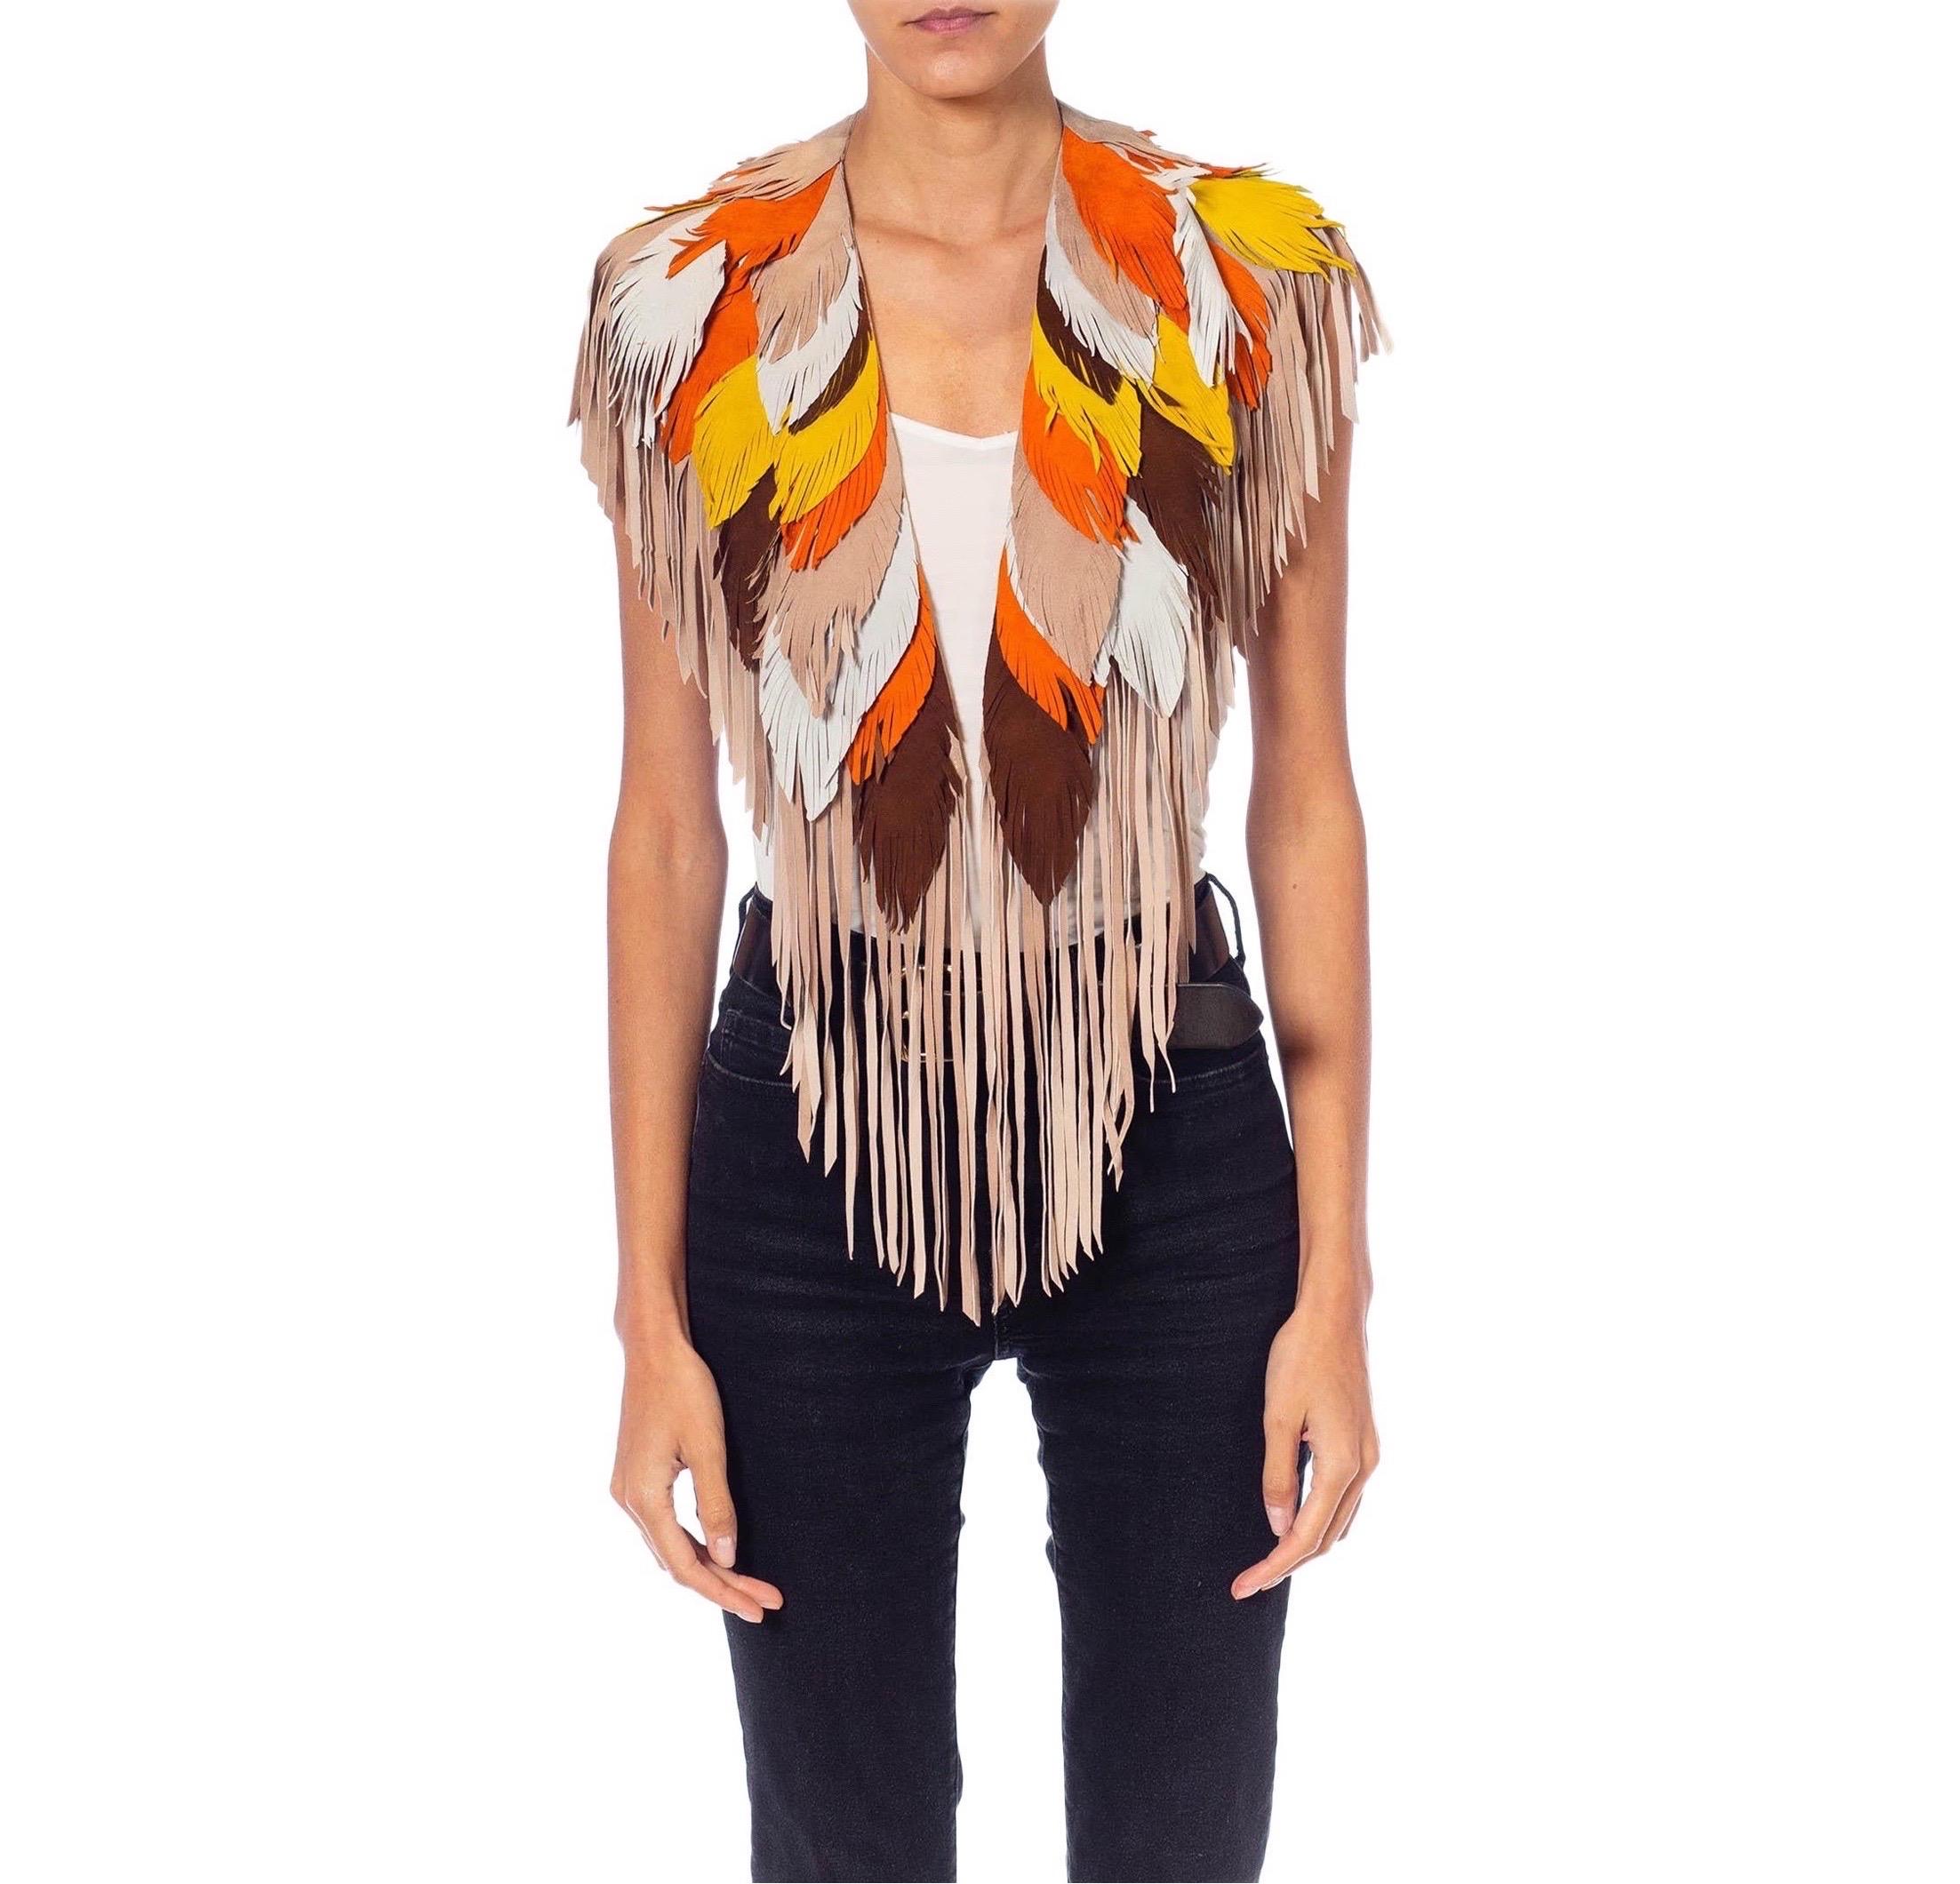 Each Feather-Leather is made by hand by our friends in Columbia in their co-op owned and operated facilities.  MORPHEW COLLECTION Phoenix Sunset Suede Fringe Feather Leather Cape 
MORPHEW COLLECTION is made entirely by hand in our NYC Ateliér of